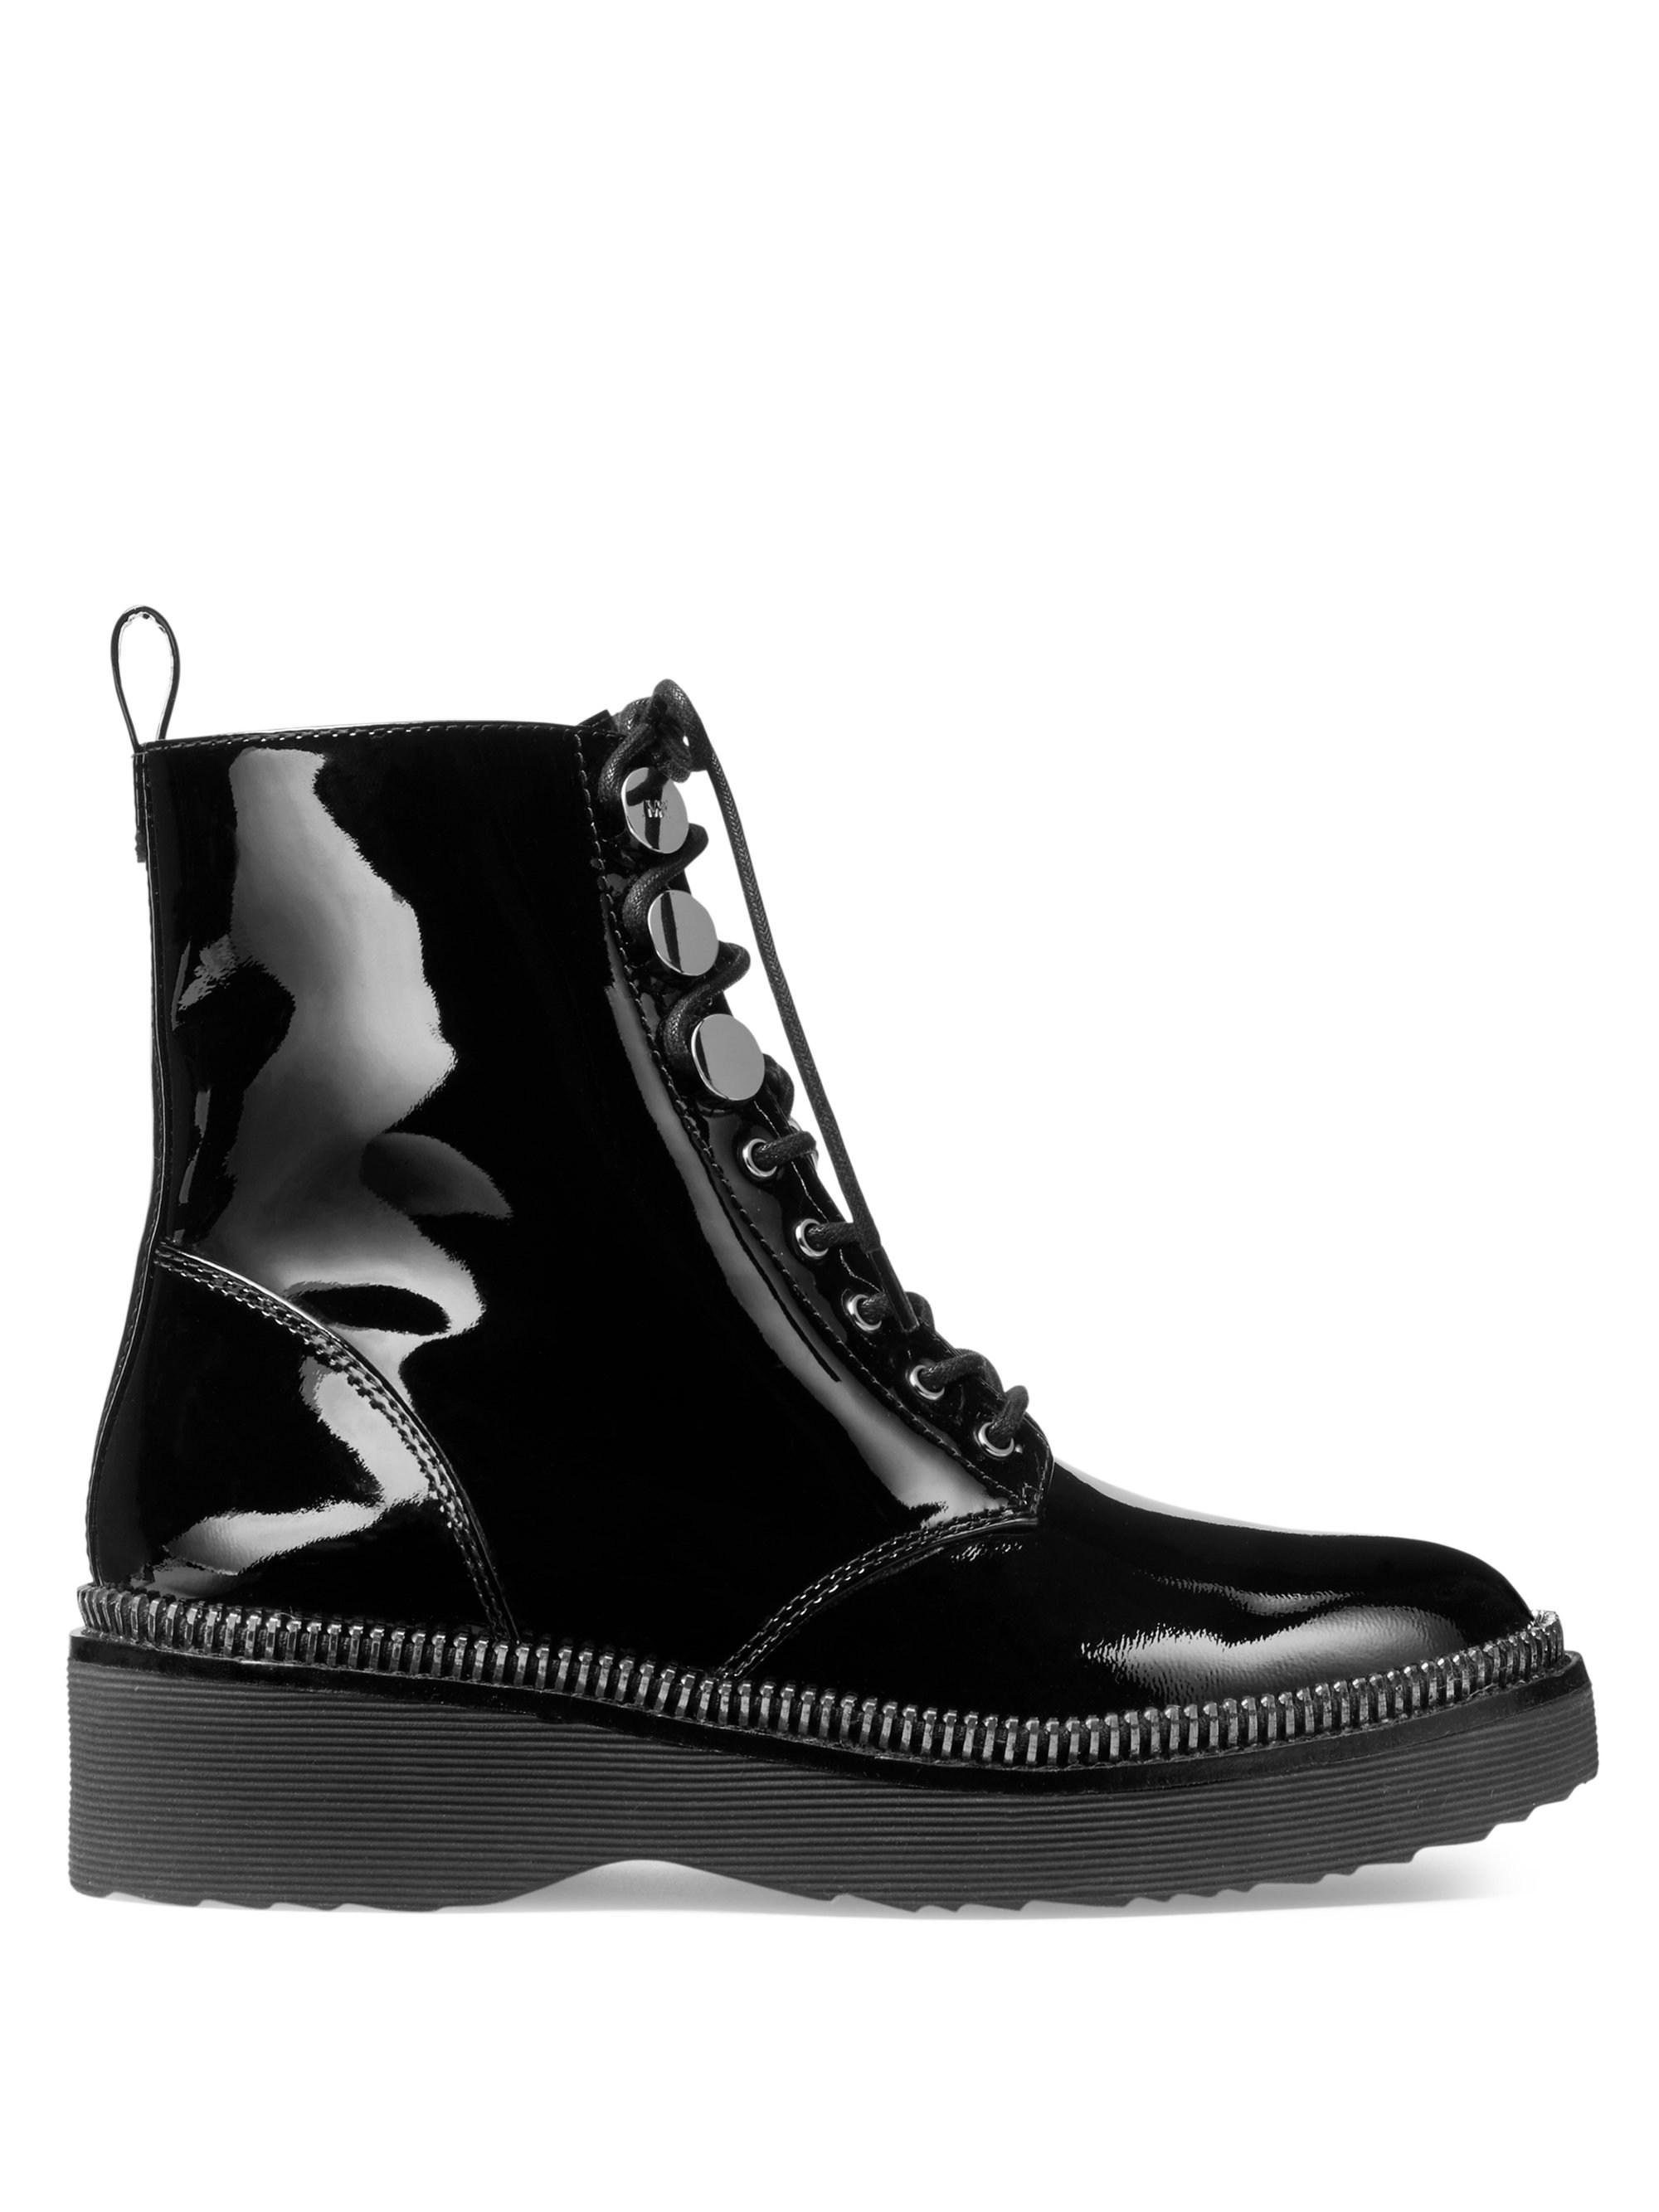 Michael Kors Haskell Patent Leather Combat Boot in Black - Lyst